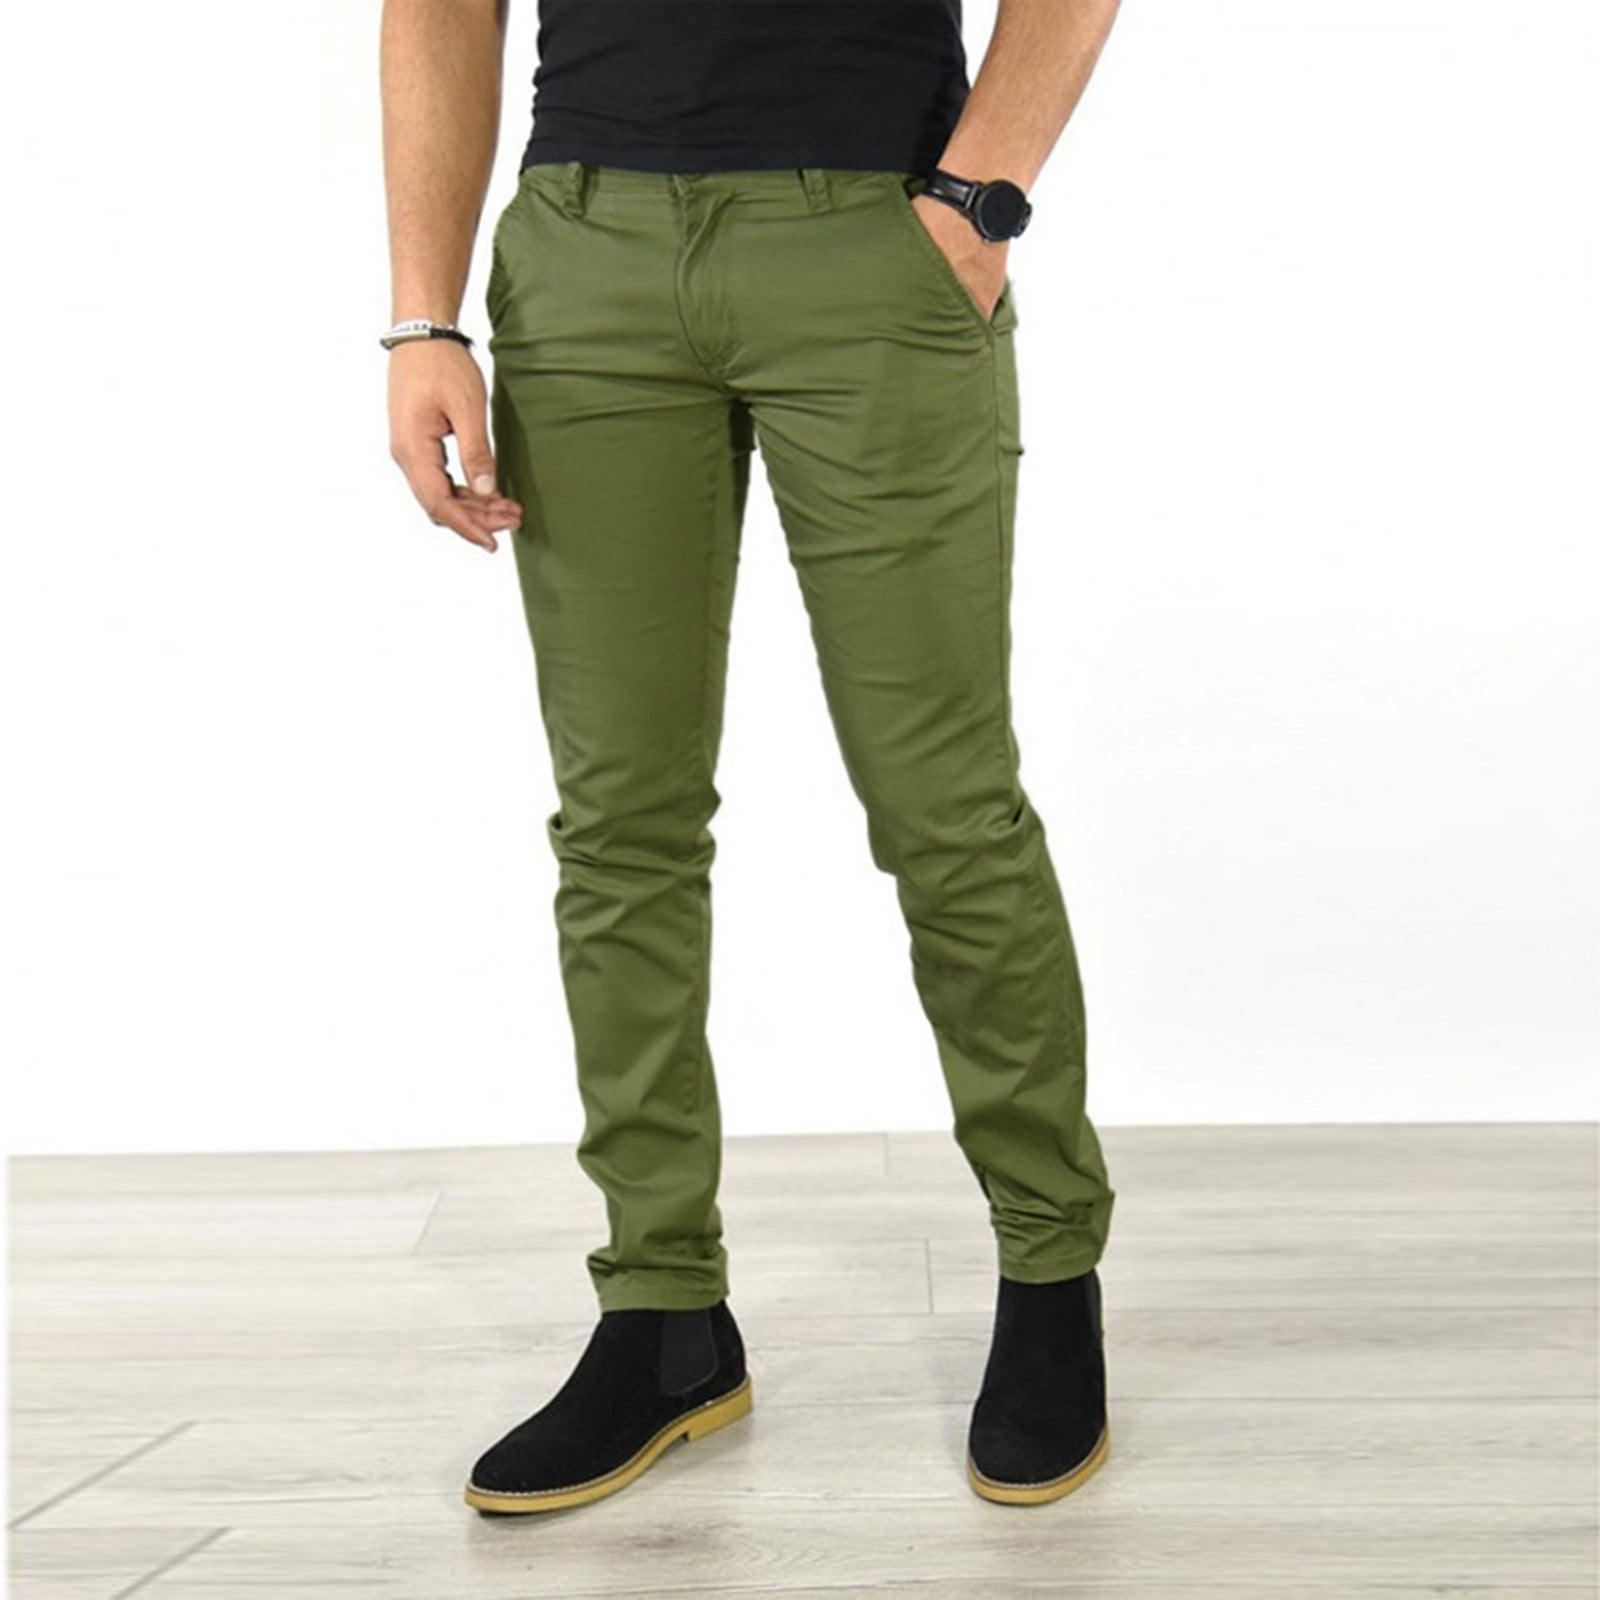 Buy Classic Style Chinos for Men's Online – Levis India Store